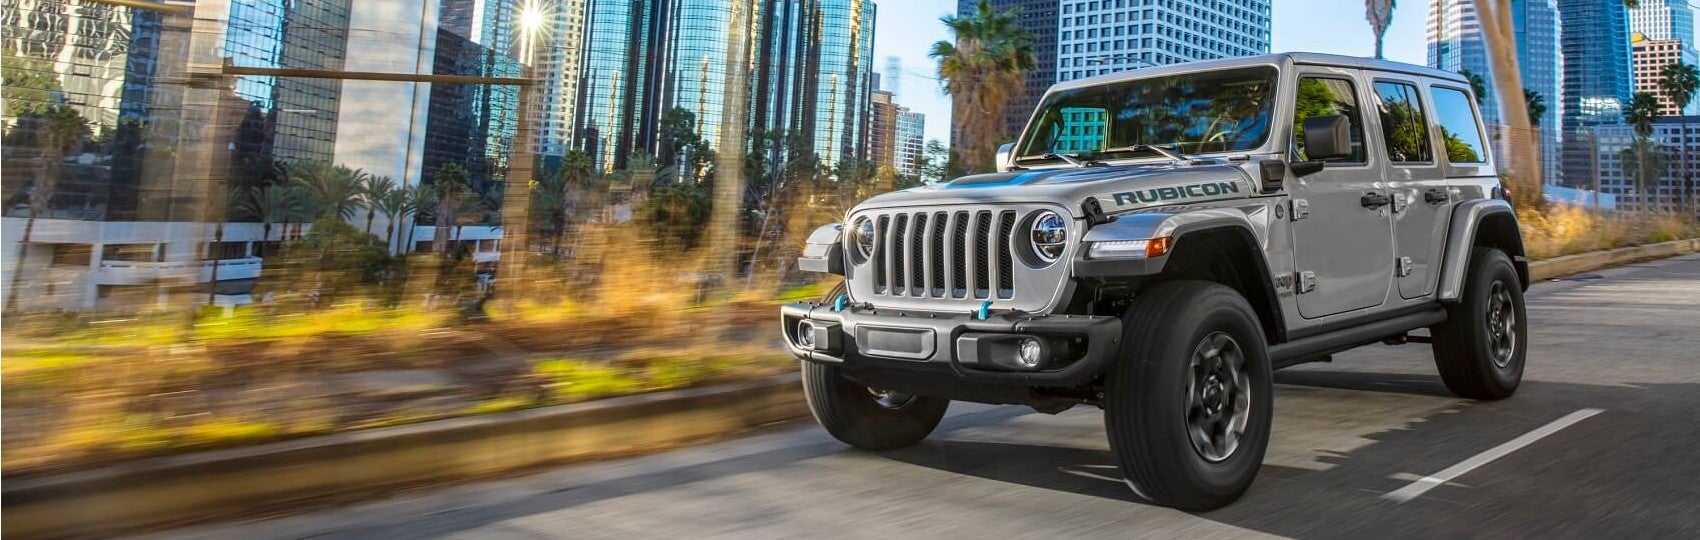 Jeep Wrangler in the City Snipped